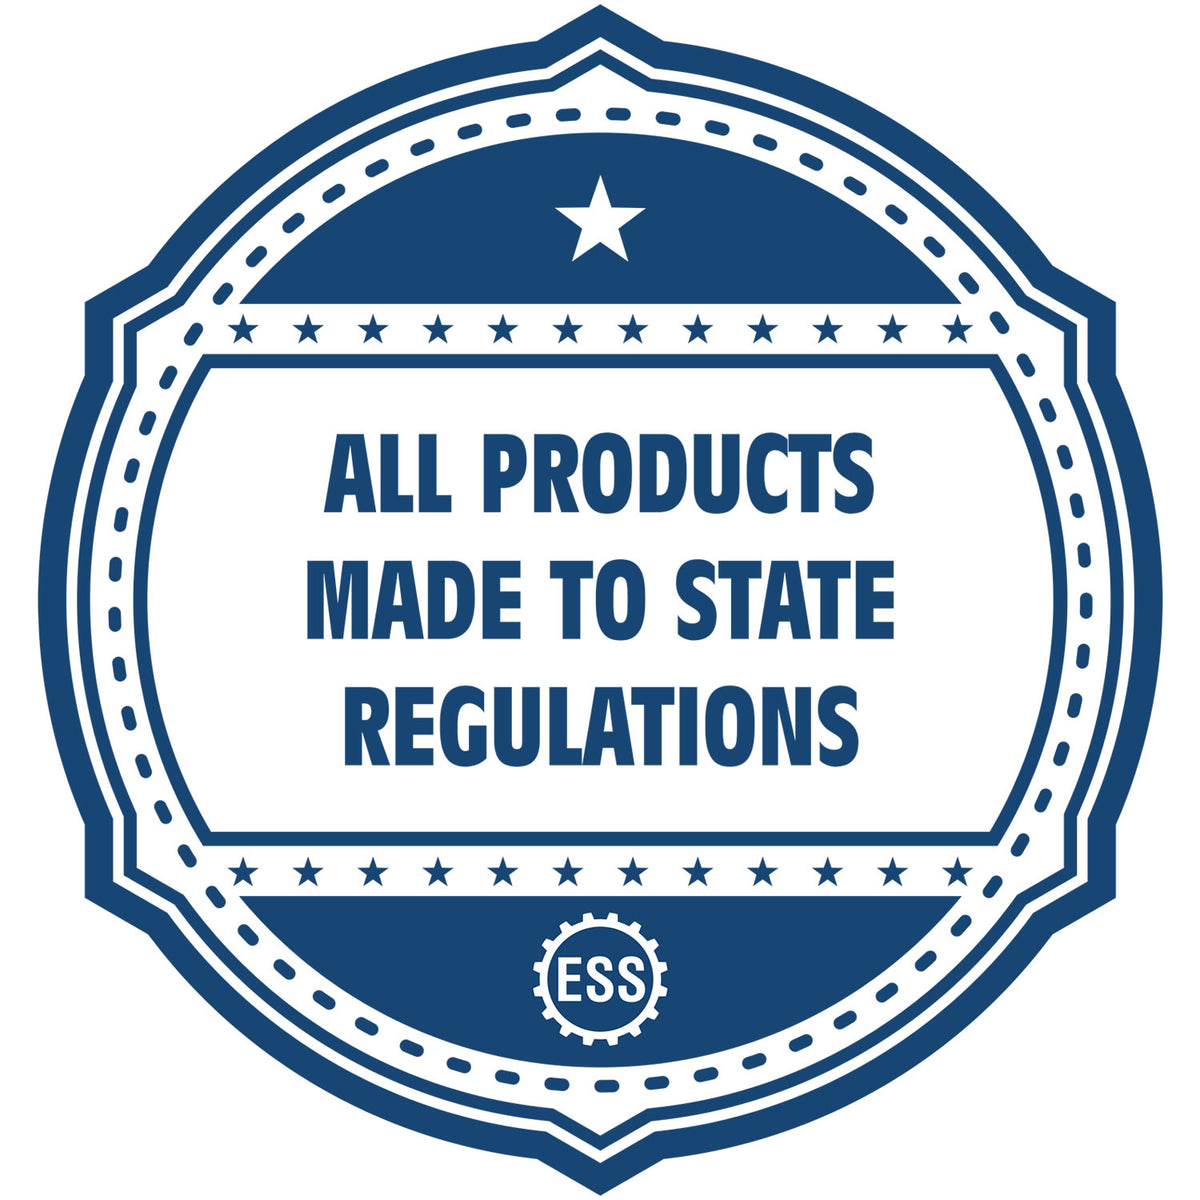 An icon or badge element for the Digital Florida Landscape Architect Stamp showing that this product is made in compliance with state regulations.